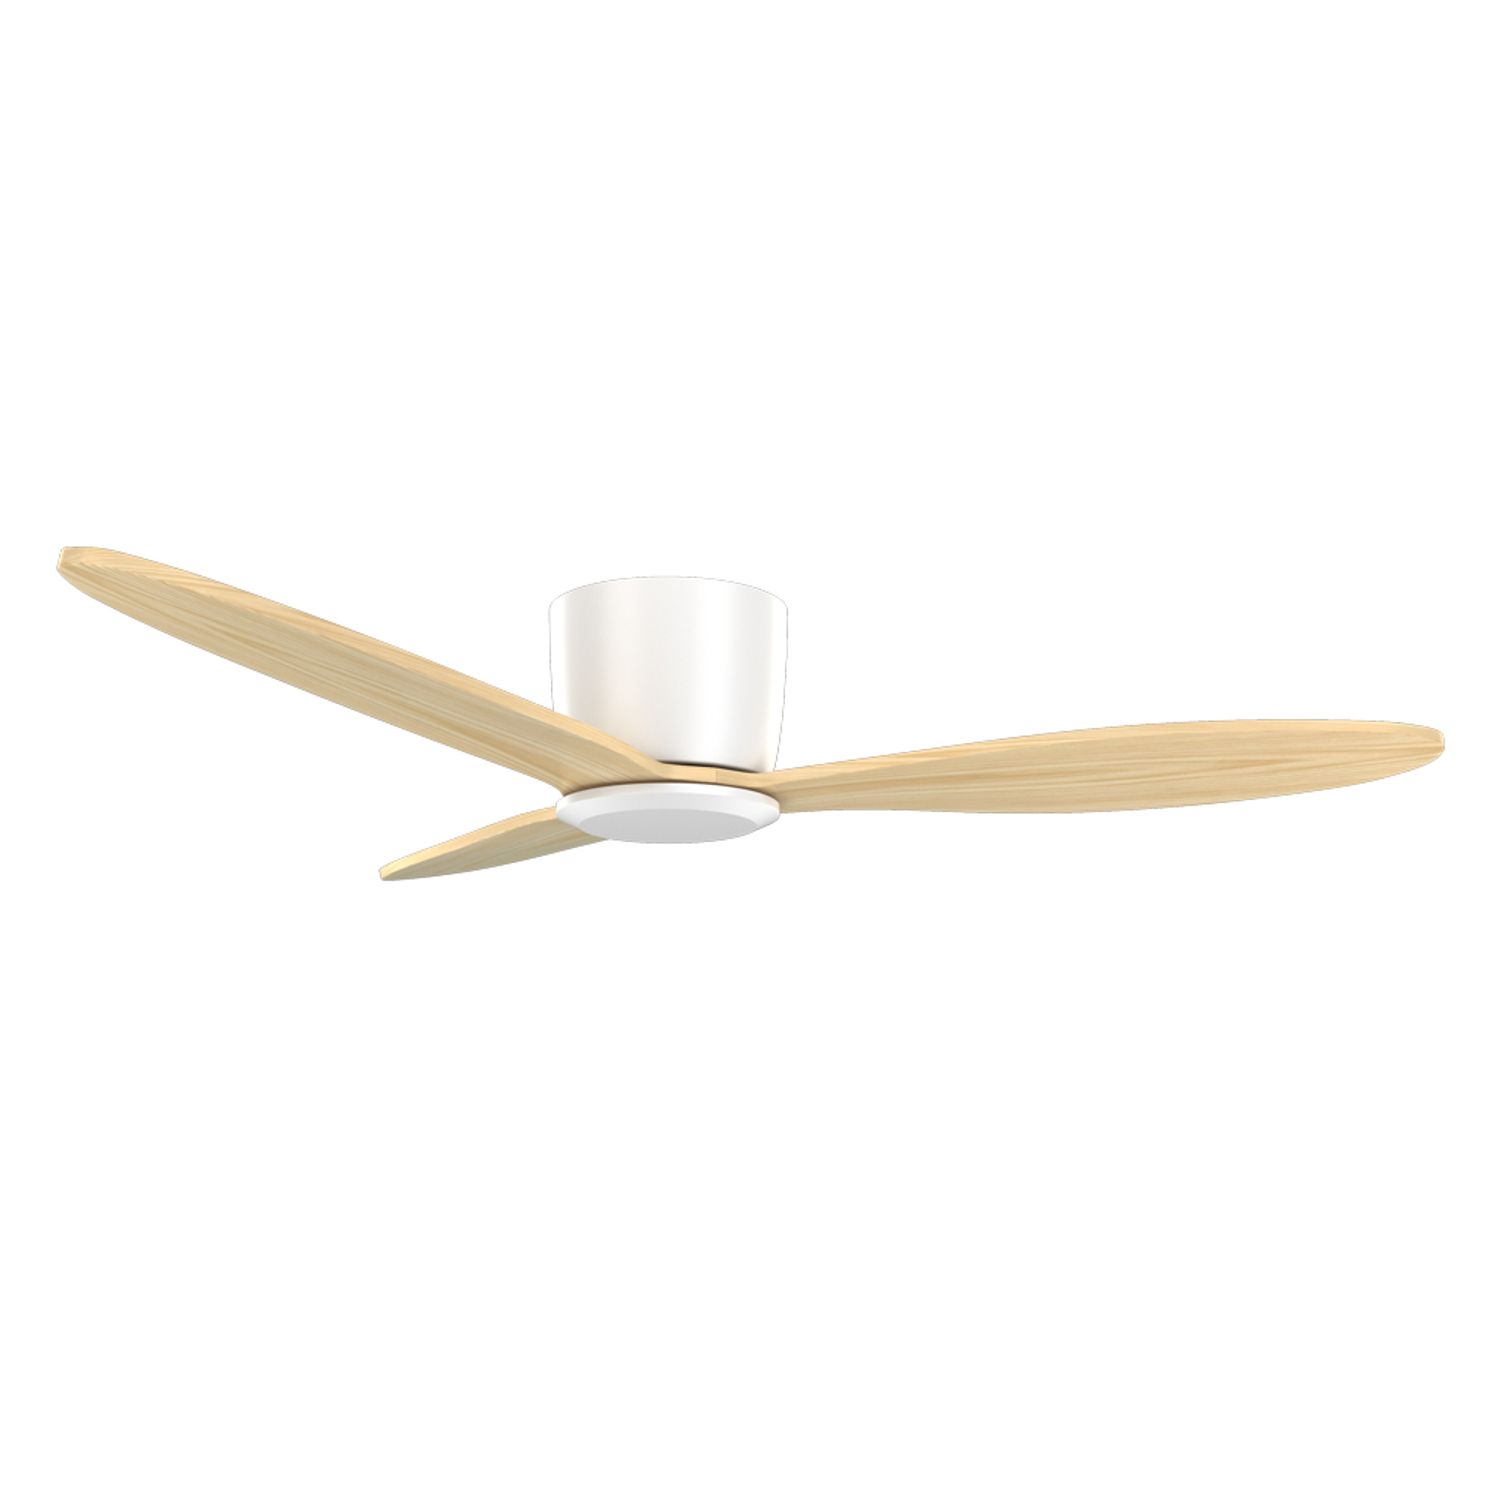 KBS white natural wood ceiling fan without light